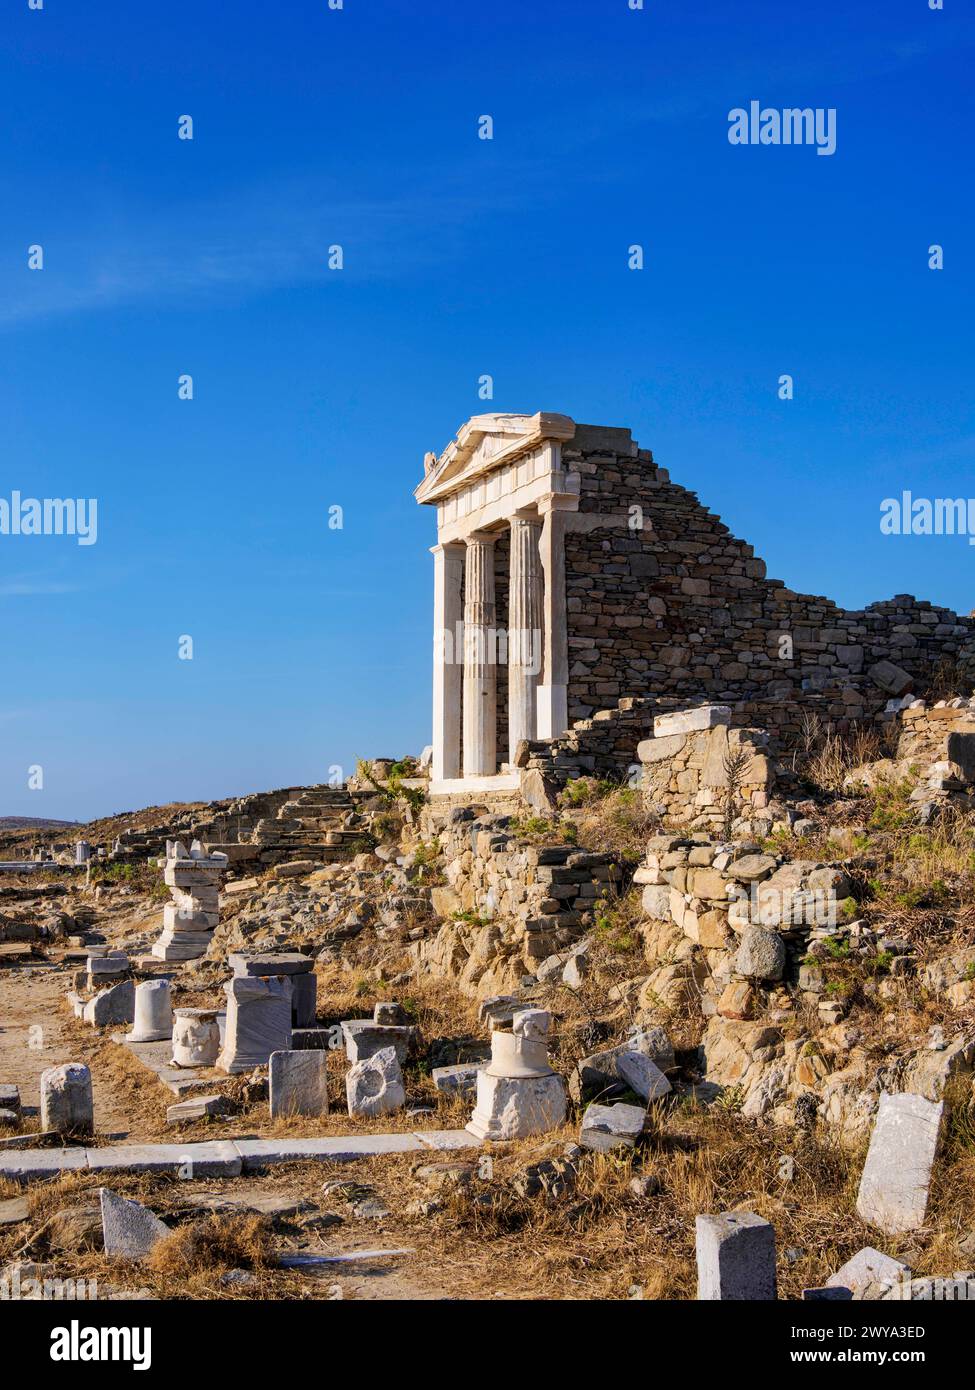 Temple of Isis, Delos Archaeological Site, UNESCO World Heritage Site, Delos Island, Cyclades, Greek Islands, Greece, Europe Copyright: KarolxKozlowsk Stock Photo